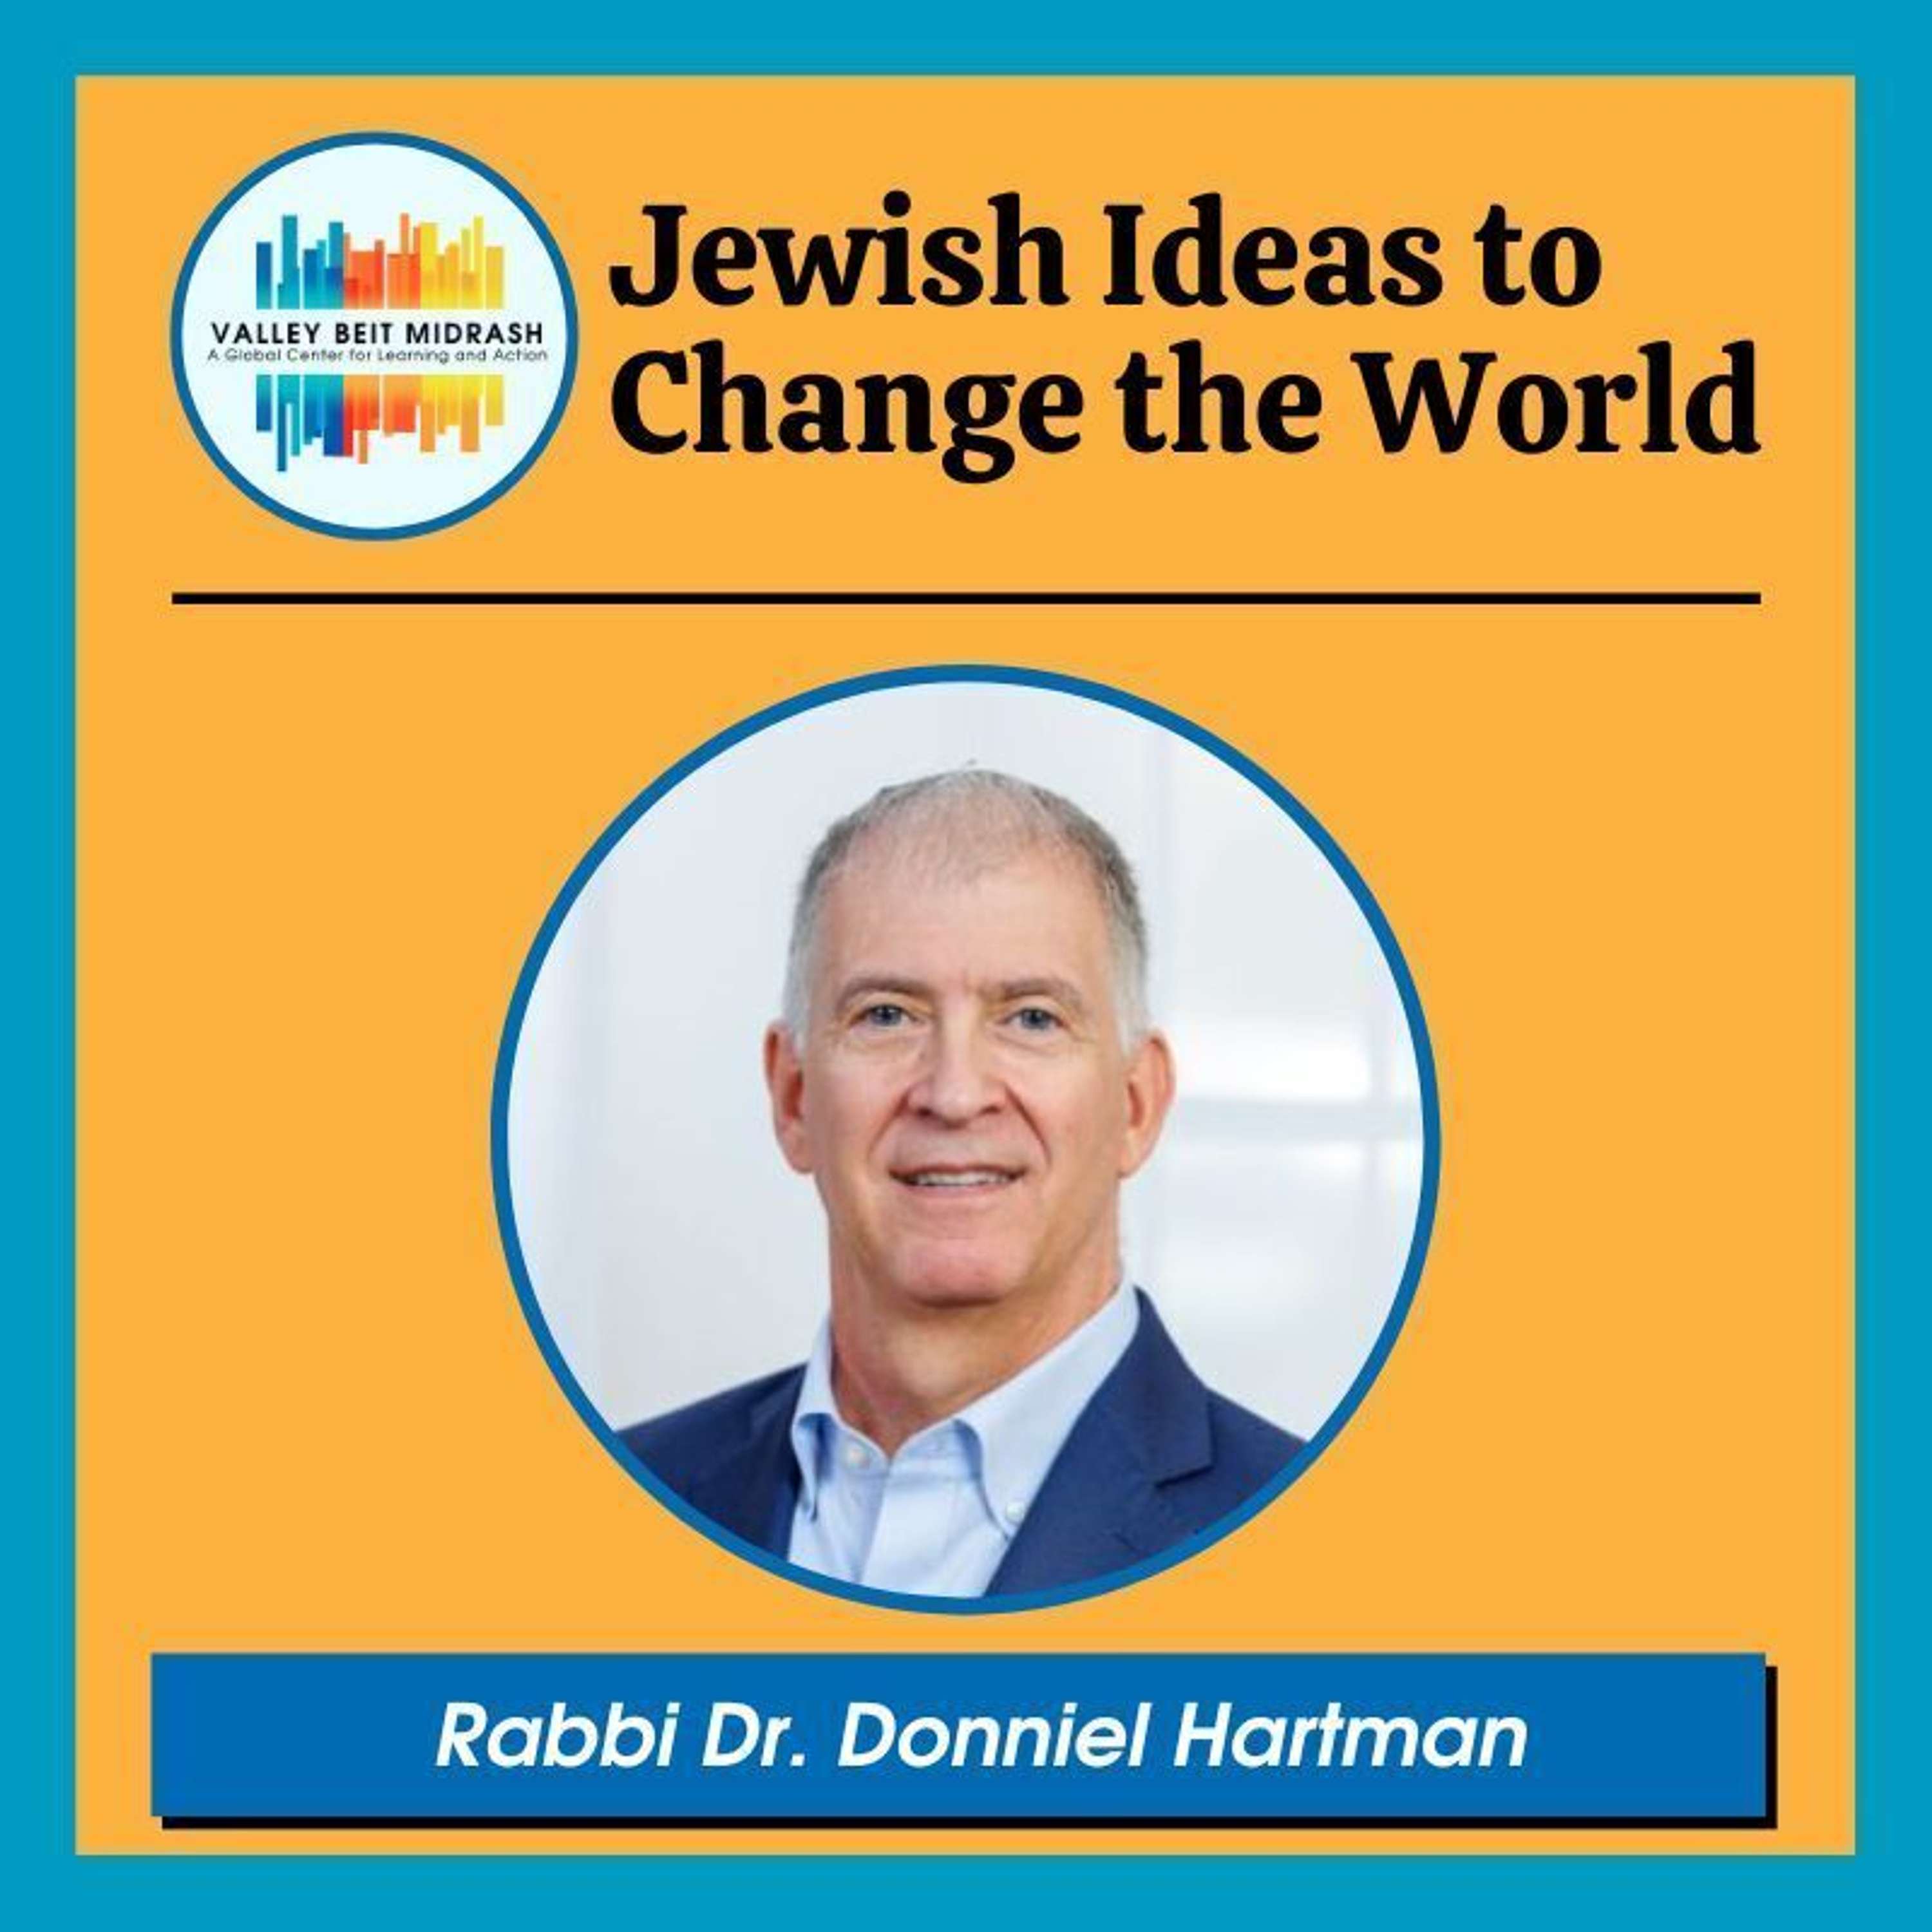 Looking at Eretz Yisrael in the Scriptures: What Can We Learn? A Conversation with Rabbi Dr. Donniel Hartman